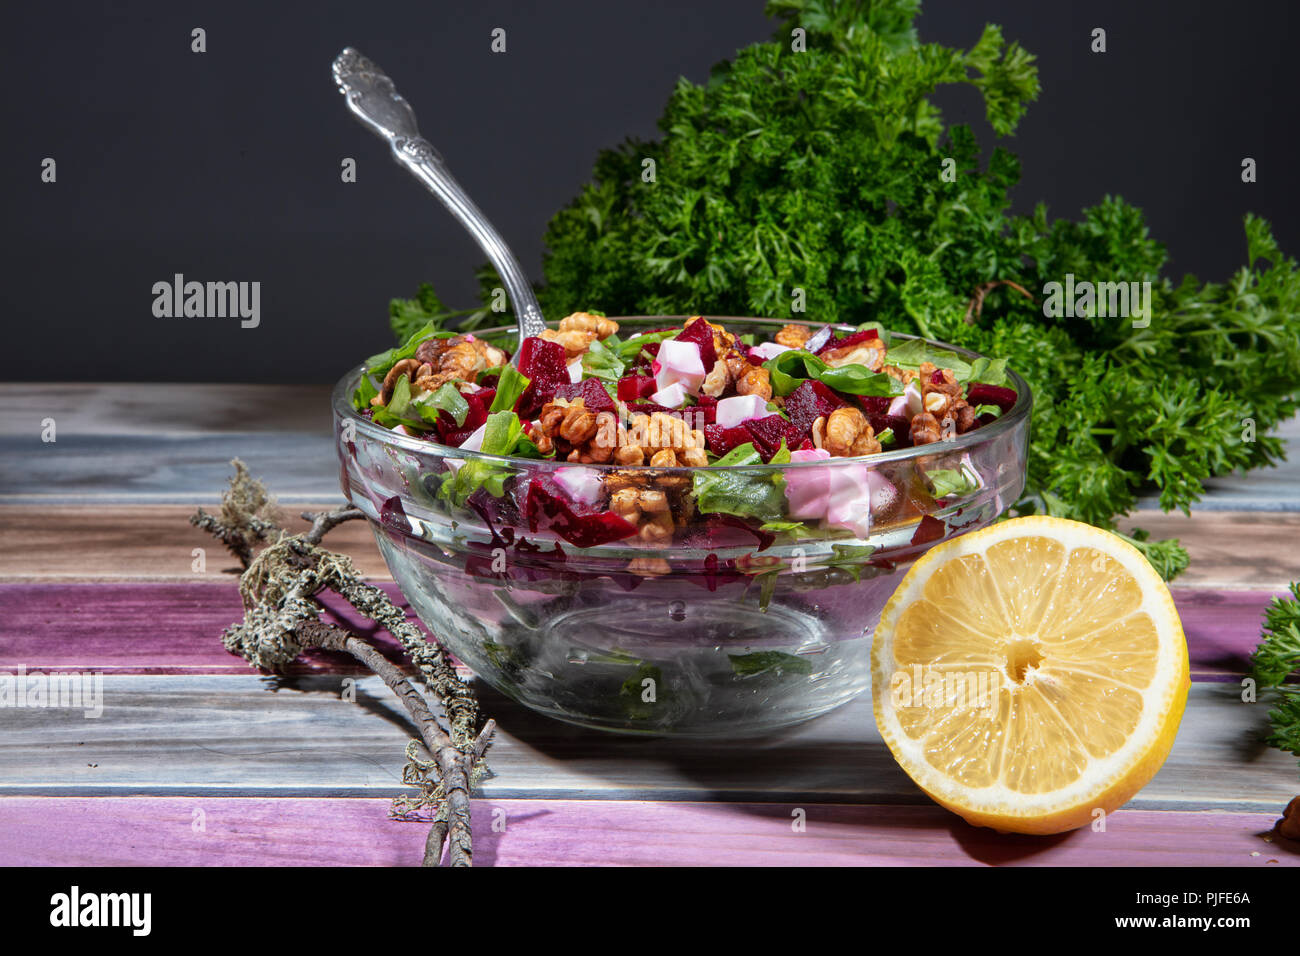 Plate with sald, lemon and greenery on a wooden table Stock Photo